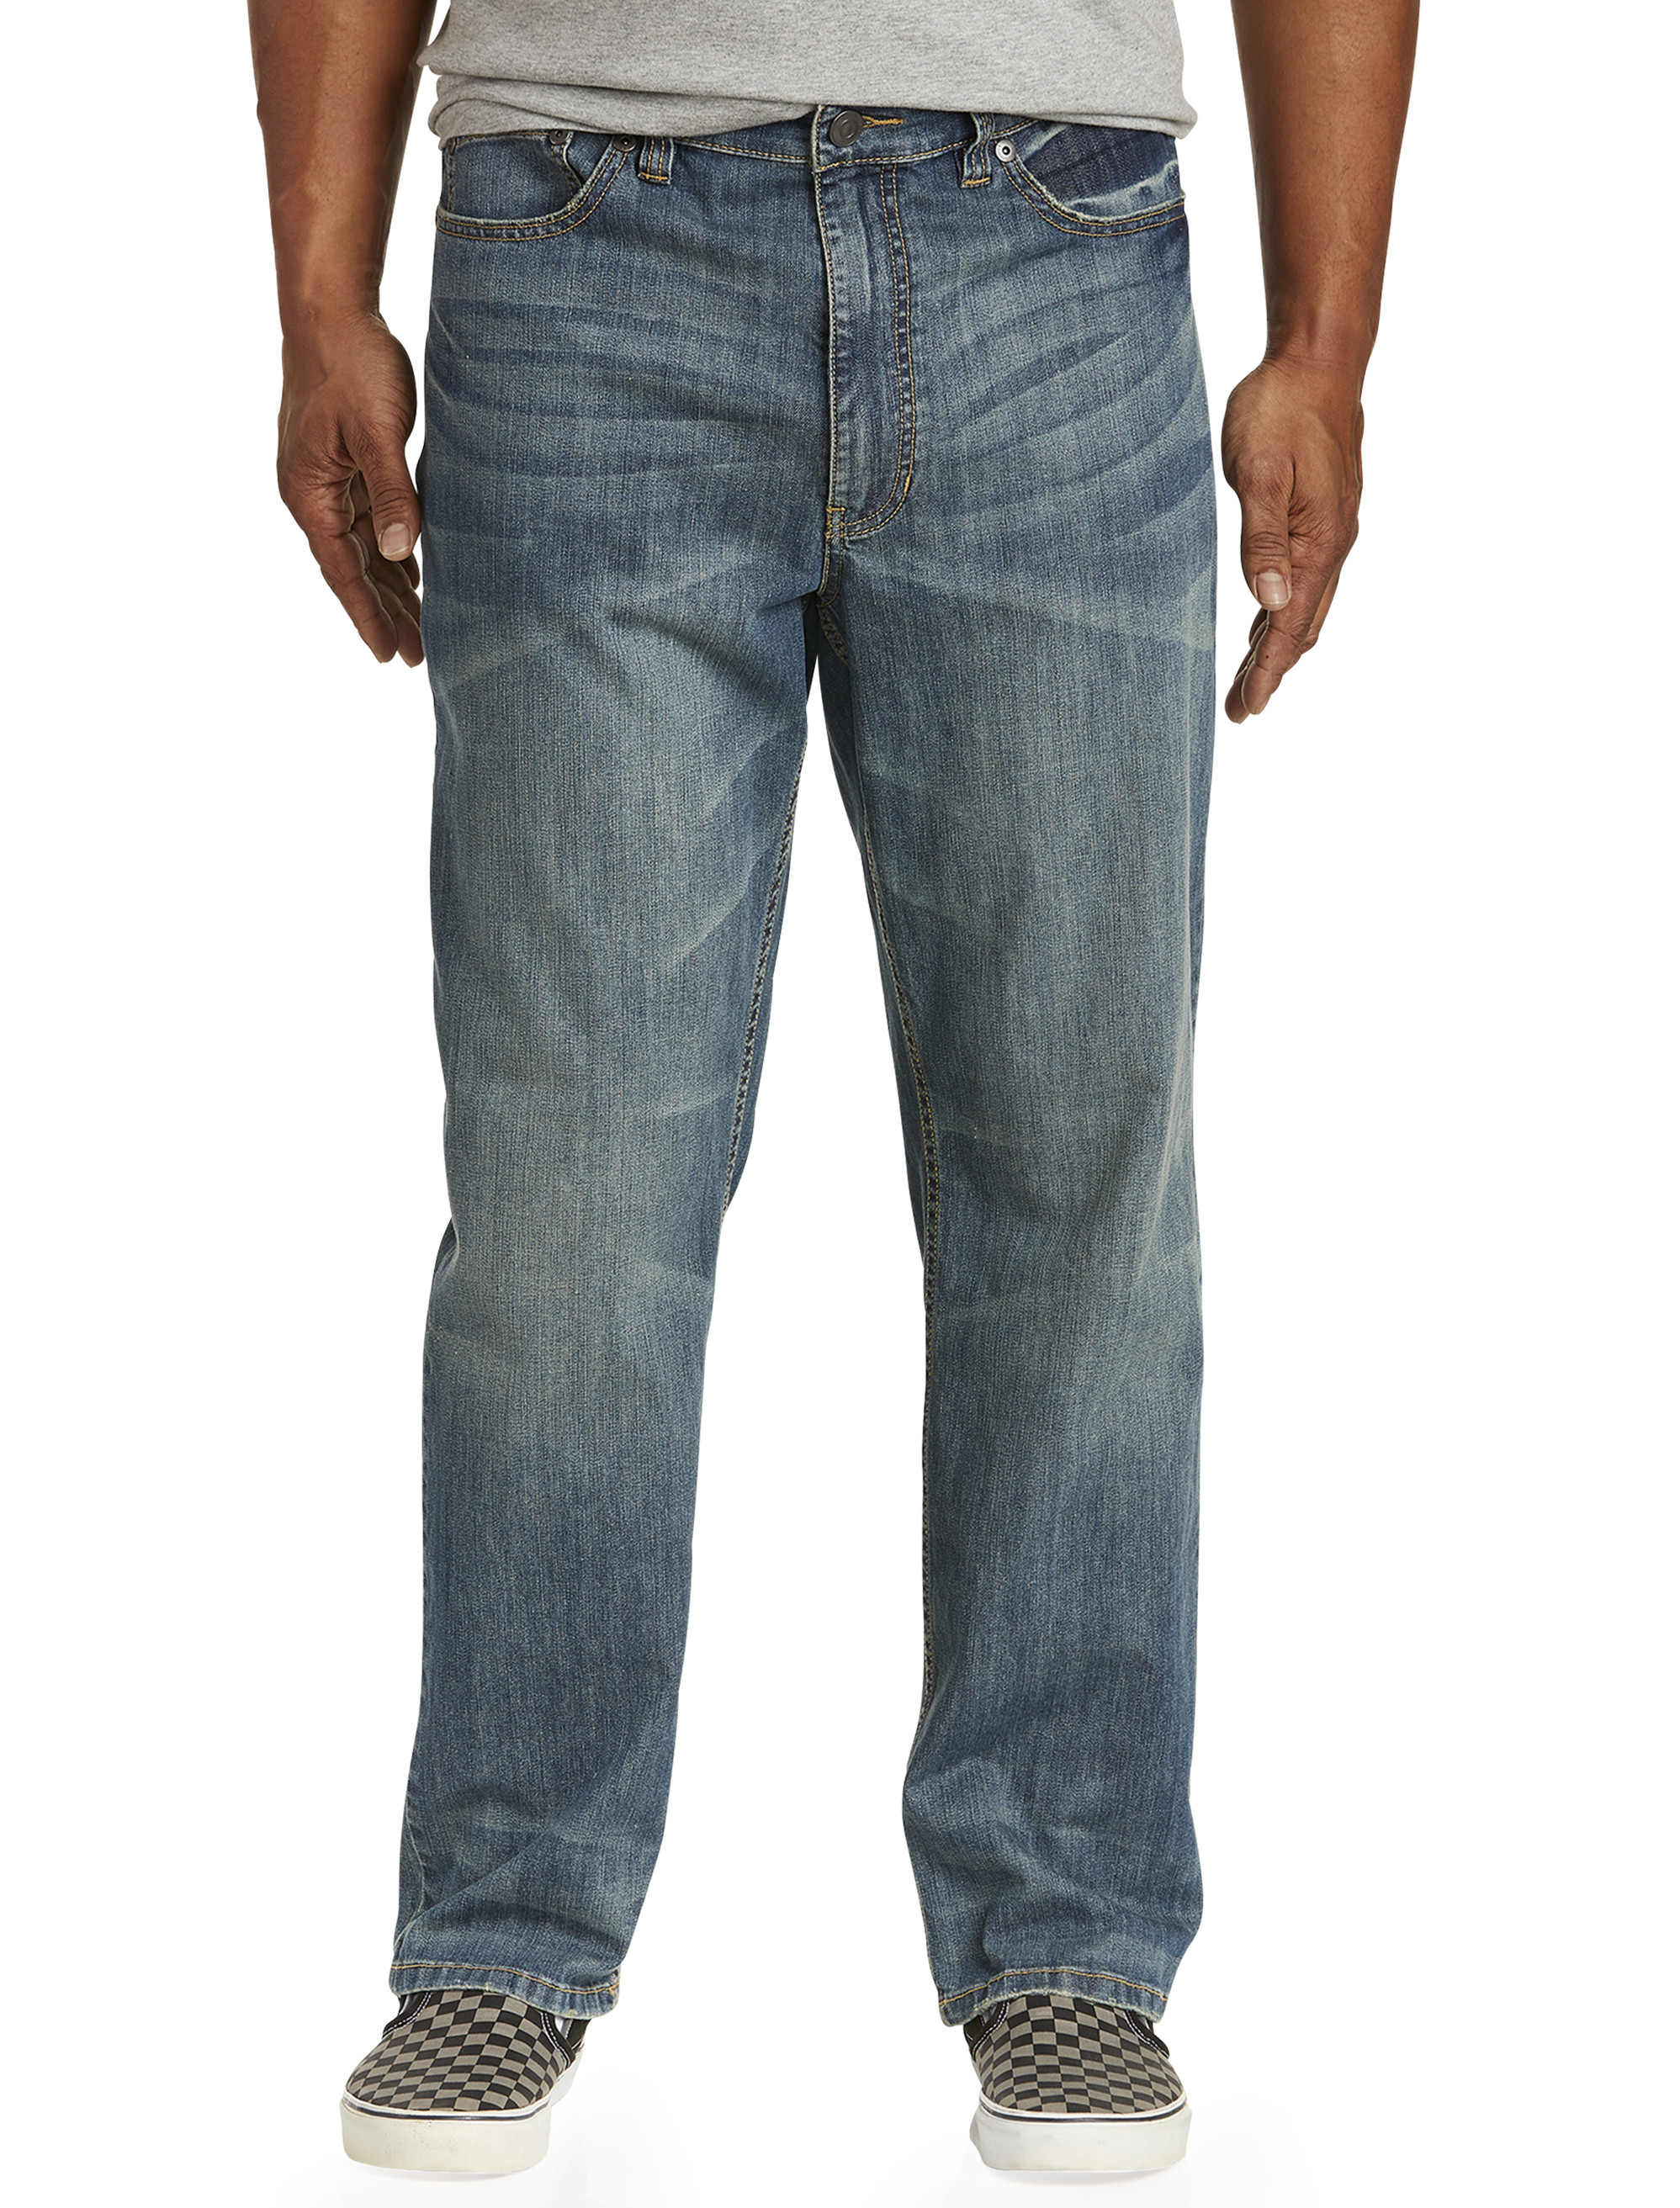 true nation jeans